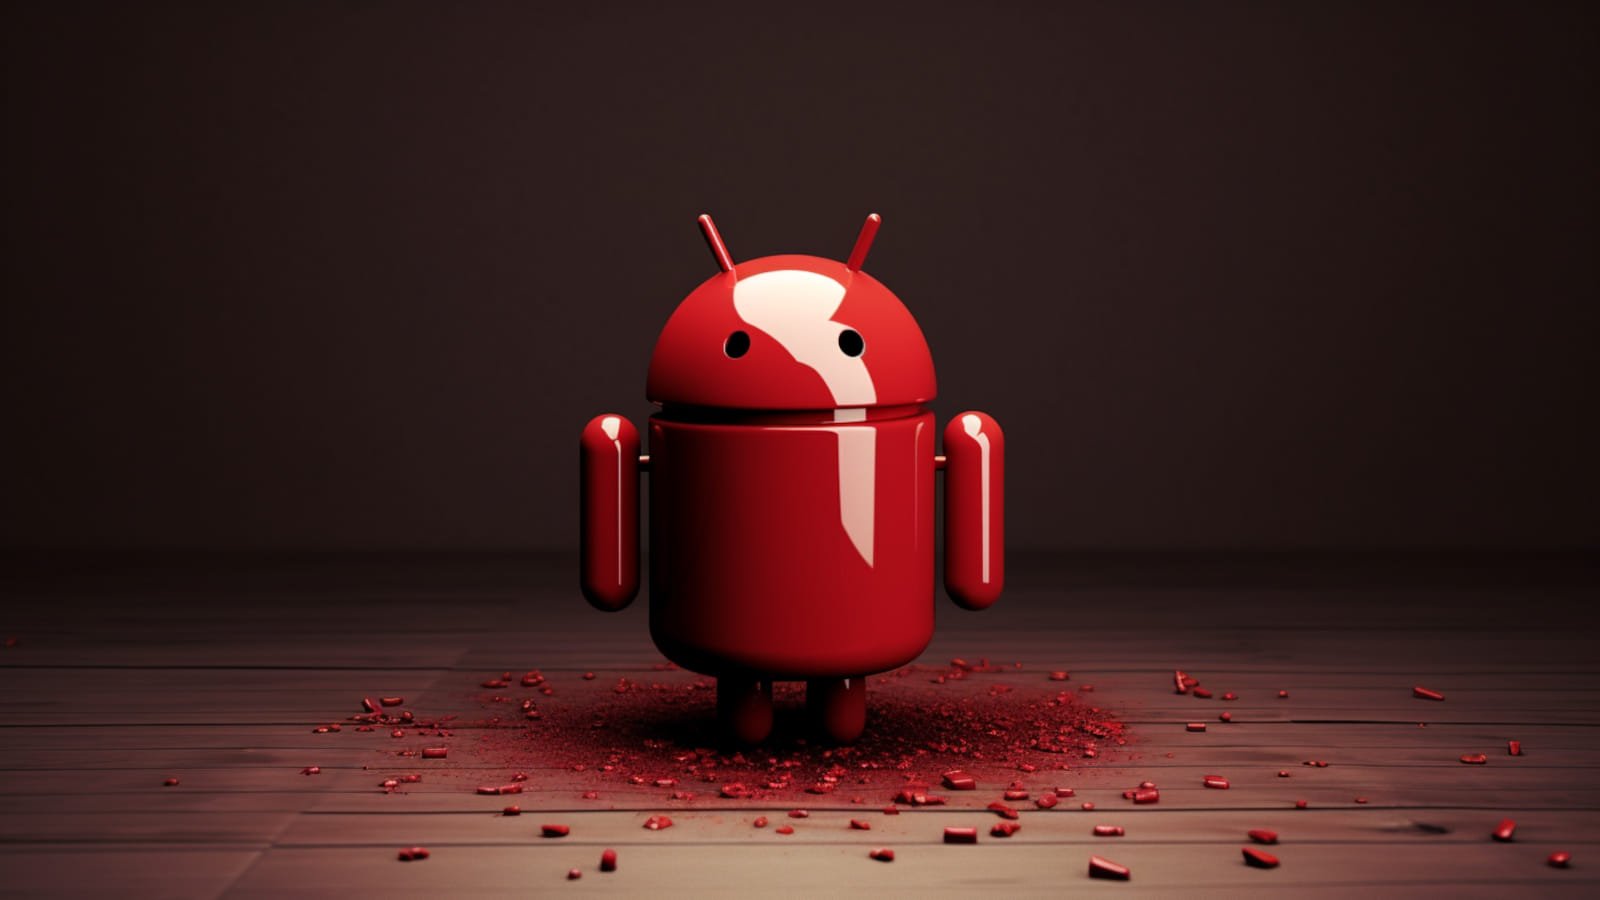 SpyLoan Android malware on Google Play downloaded 12 million times